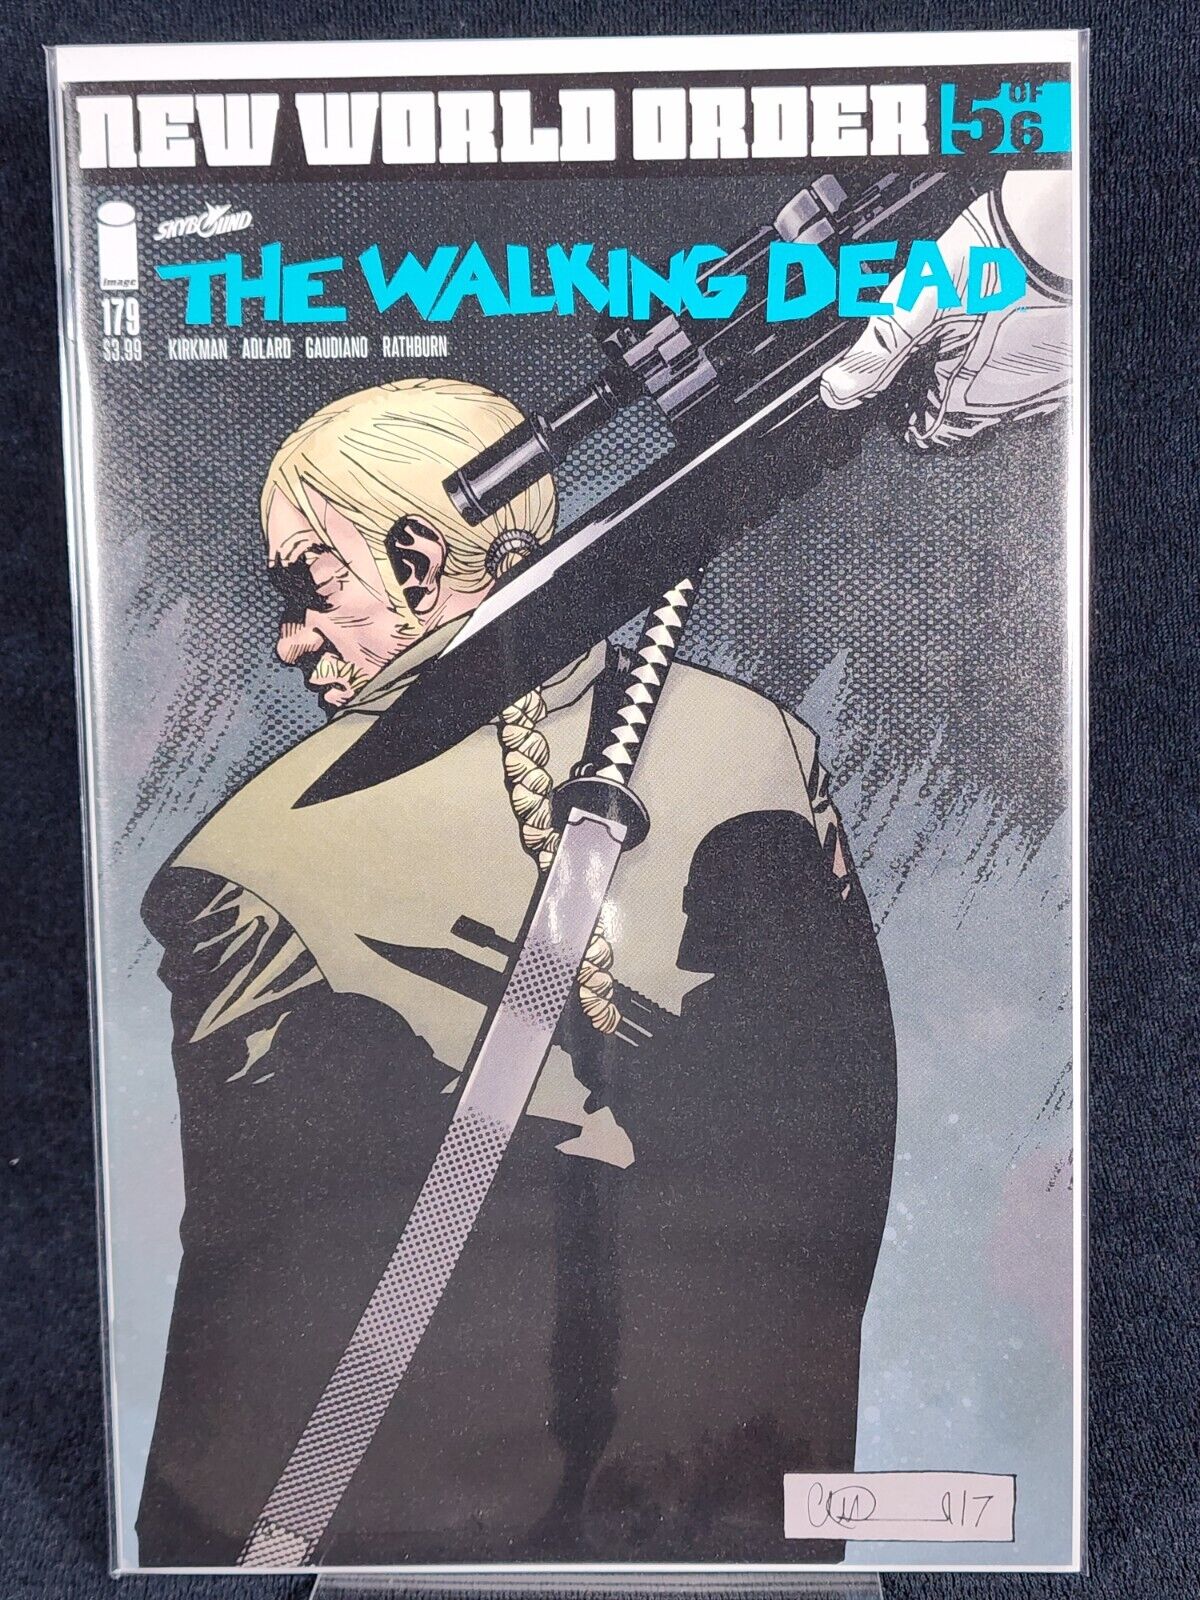 The Walking Dead #170 New World Orrder Part 5 Of 6 9.0